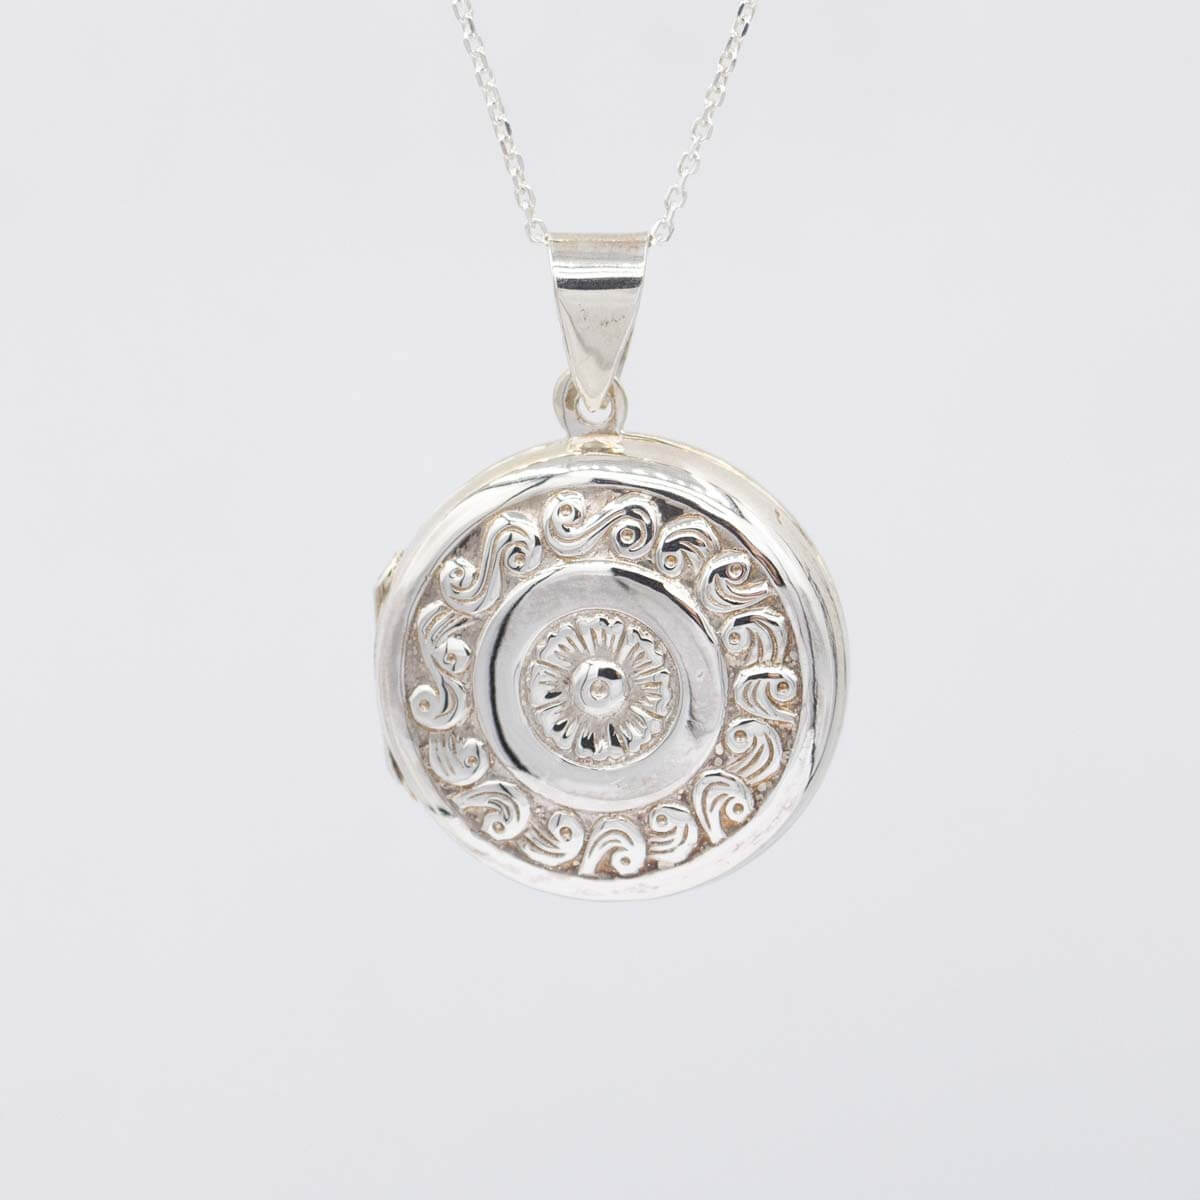 Large silver locket against a white background